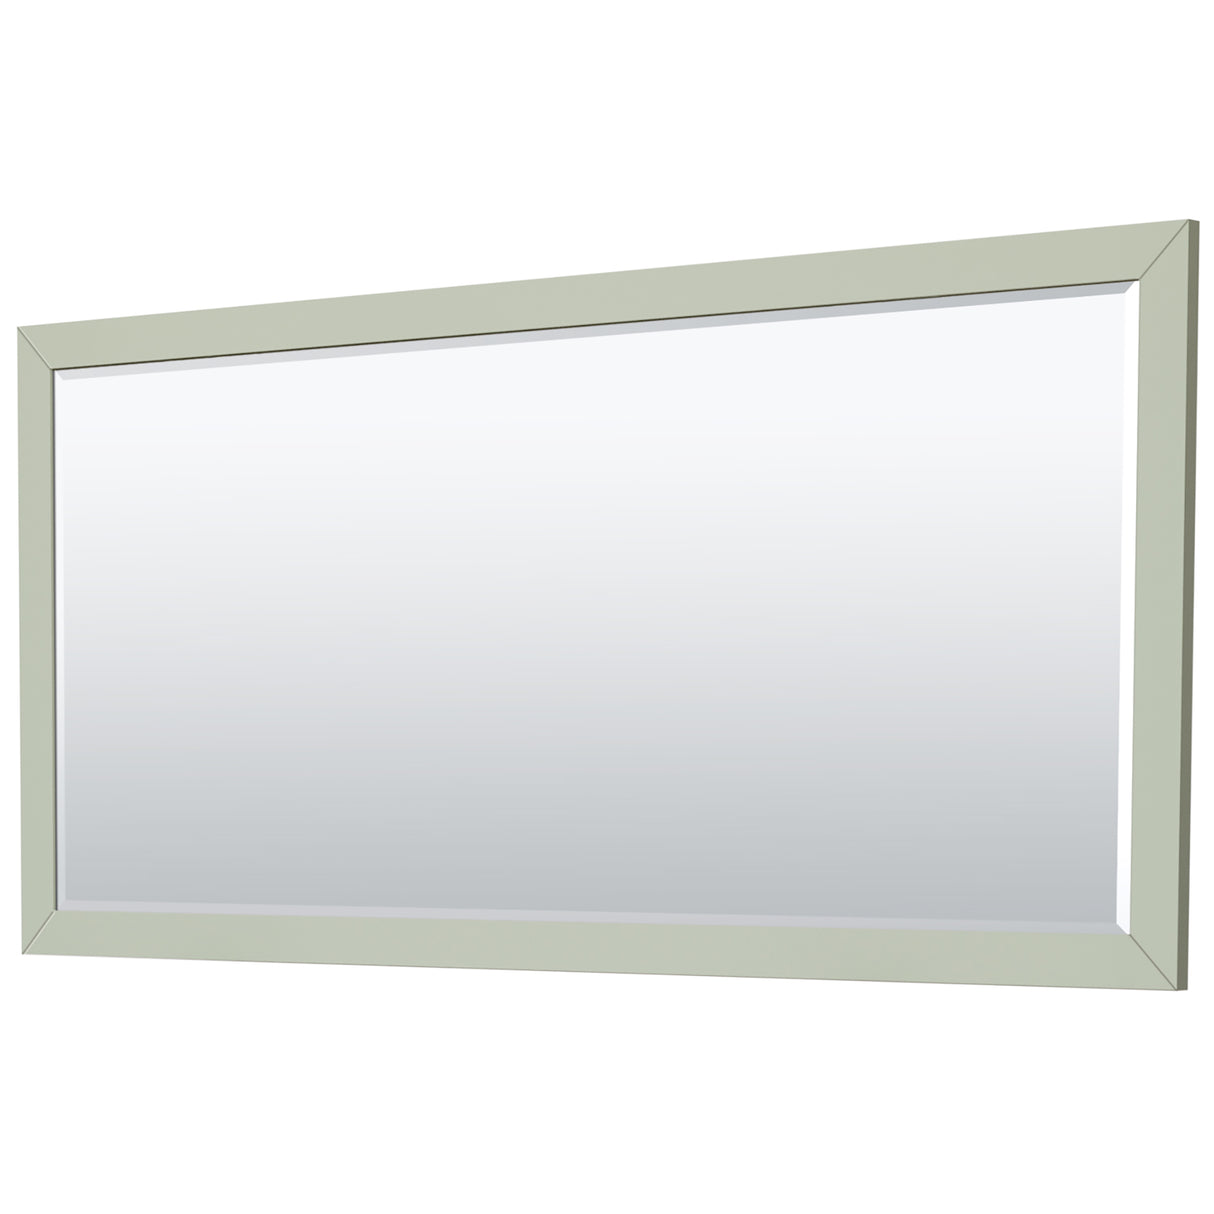 Icon 72 Inch Double Bathroom Vanity in Light Green White Carrara Marble Countertop Undermount Square Sinks Brushed Nickel Trim 70 Inch Mirror